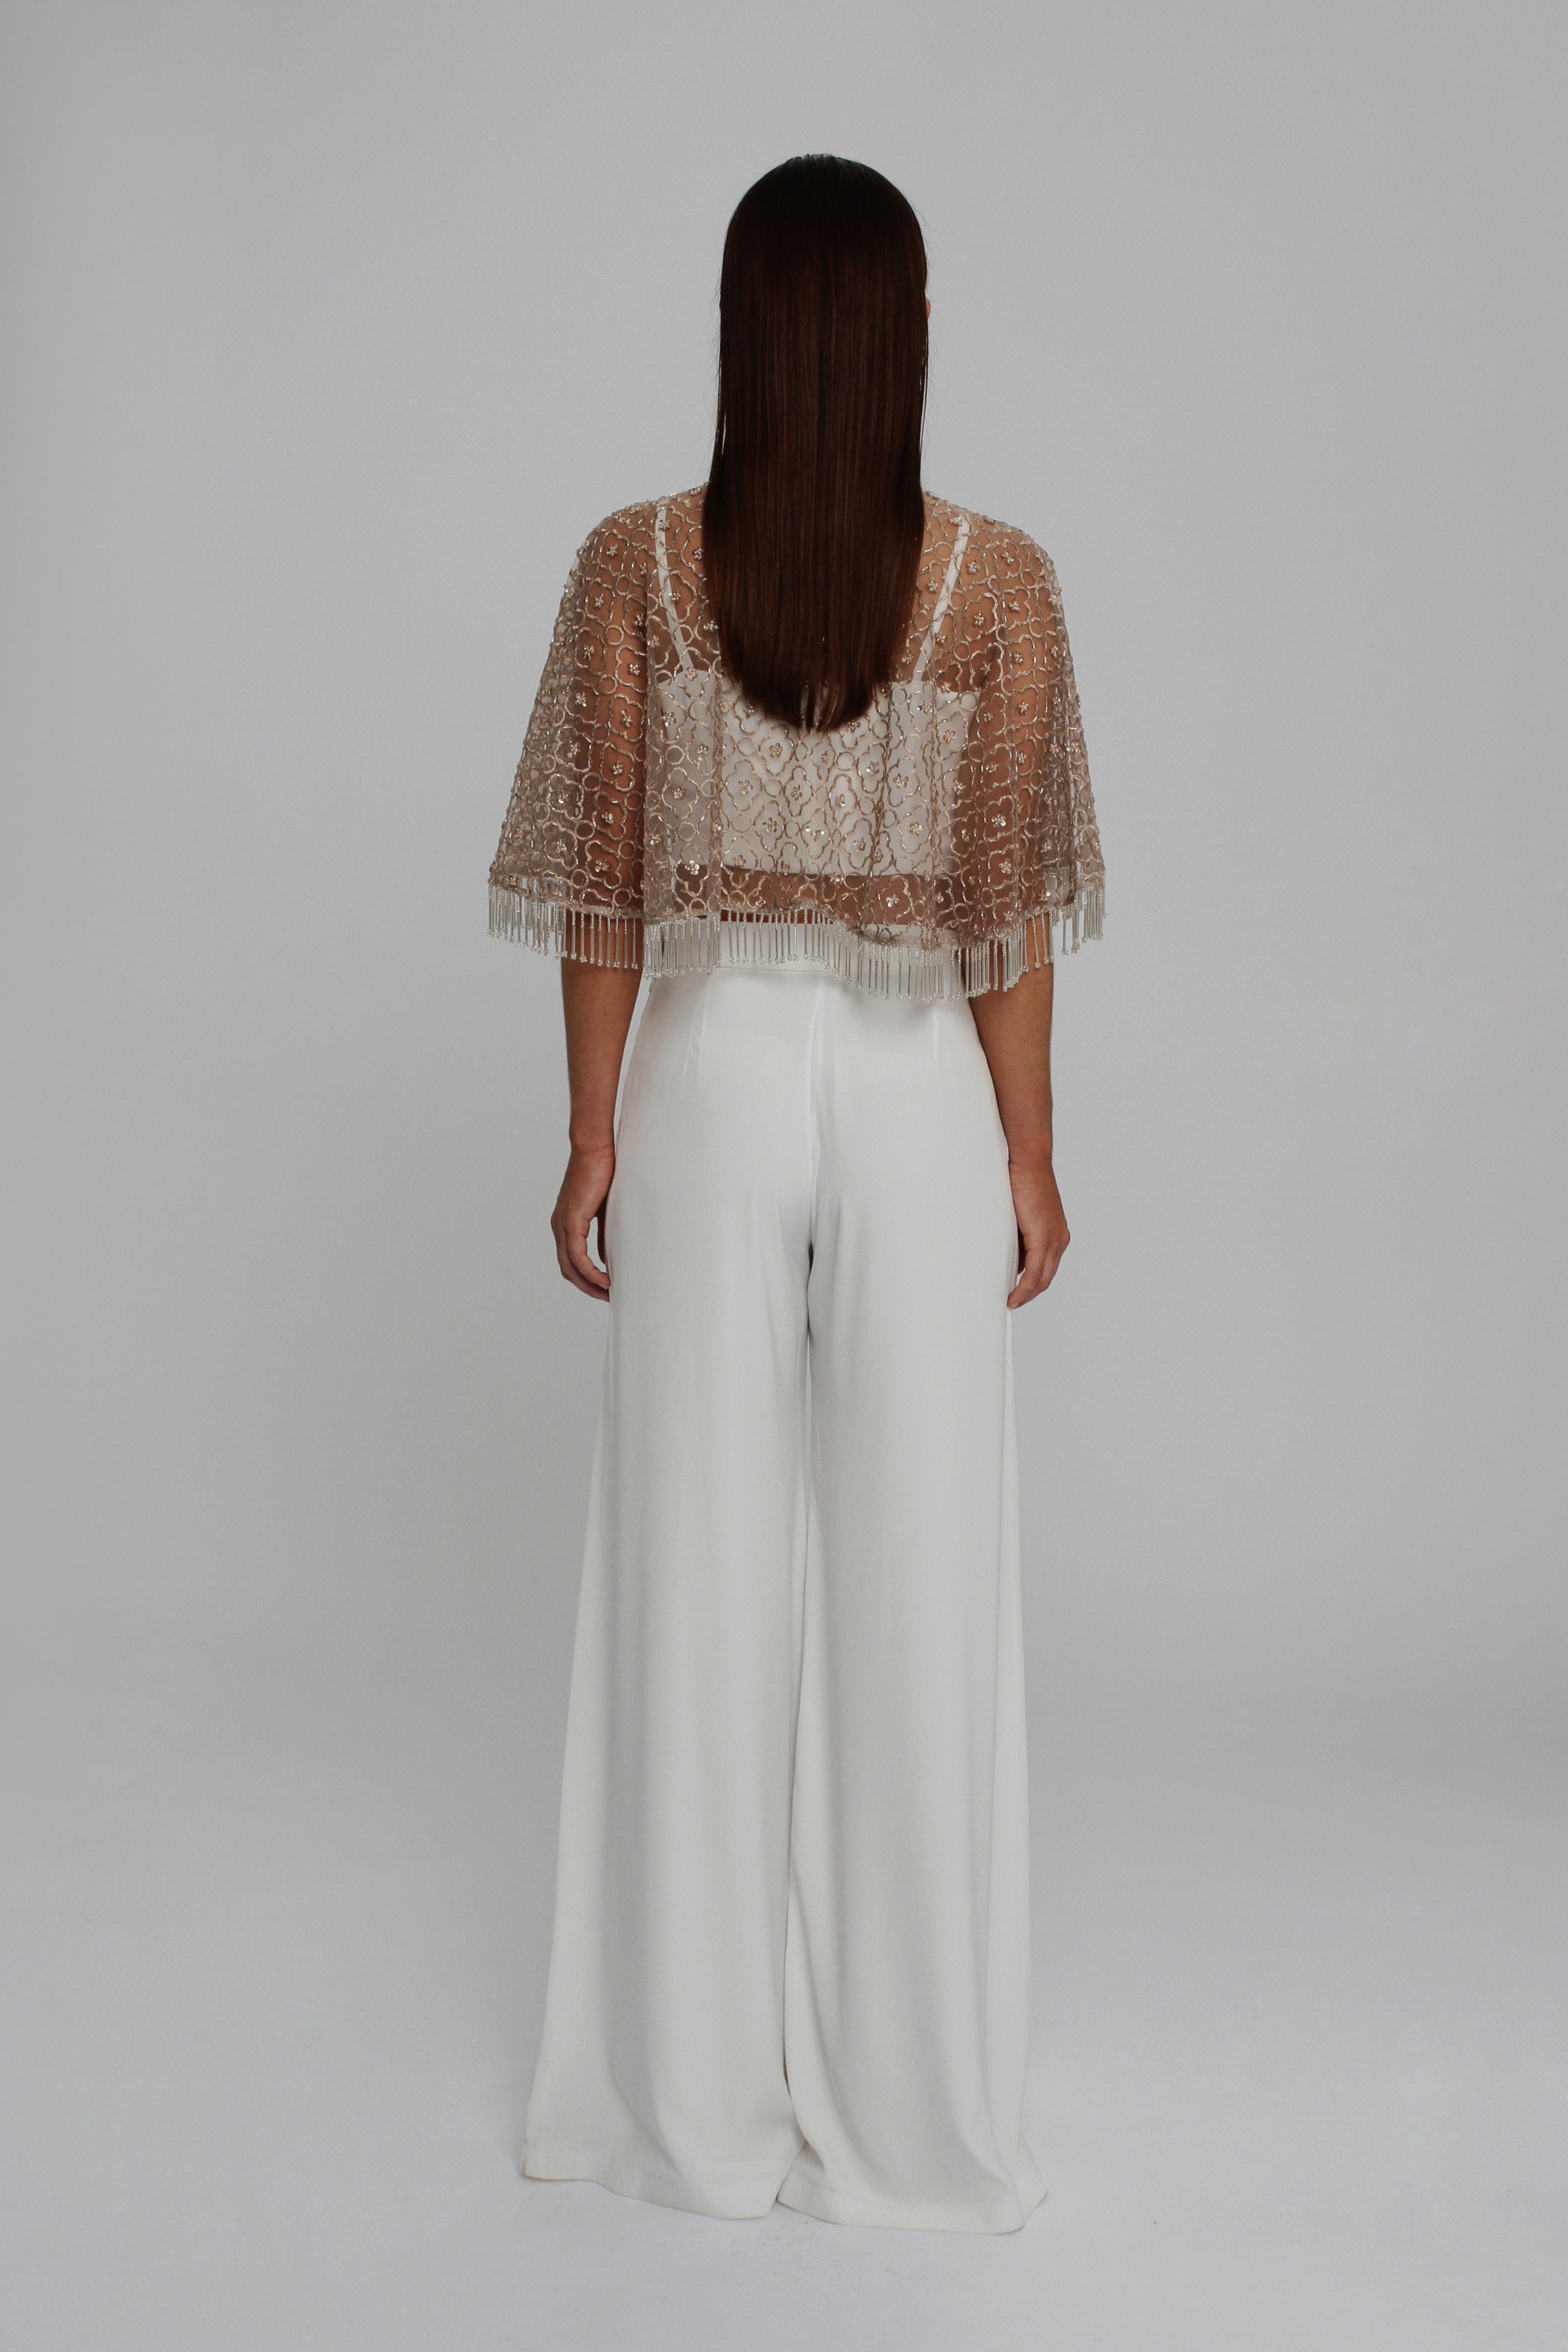 Embellished Bolero with Blush Crop Top and Evening Palazzo Trouser UME London Cape Evening Outfits London Back